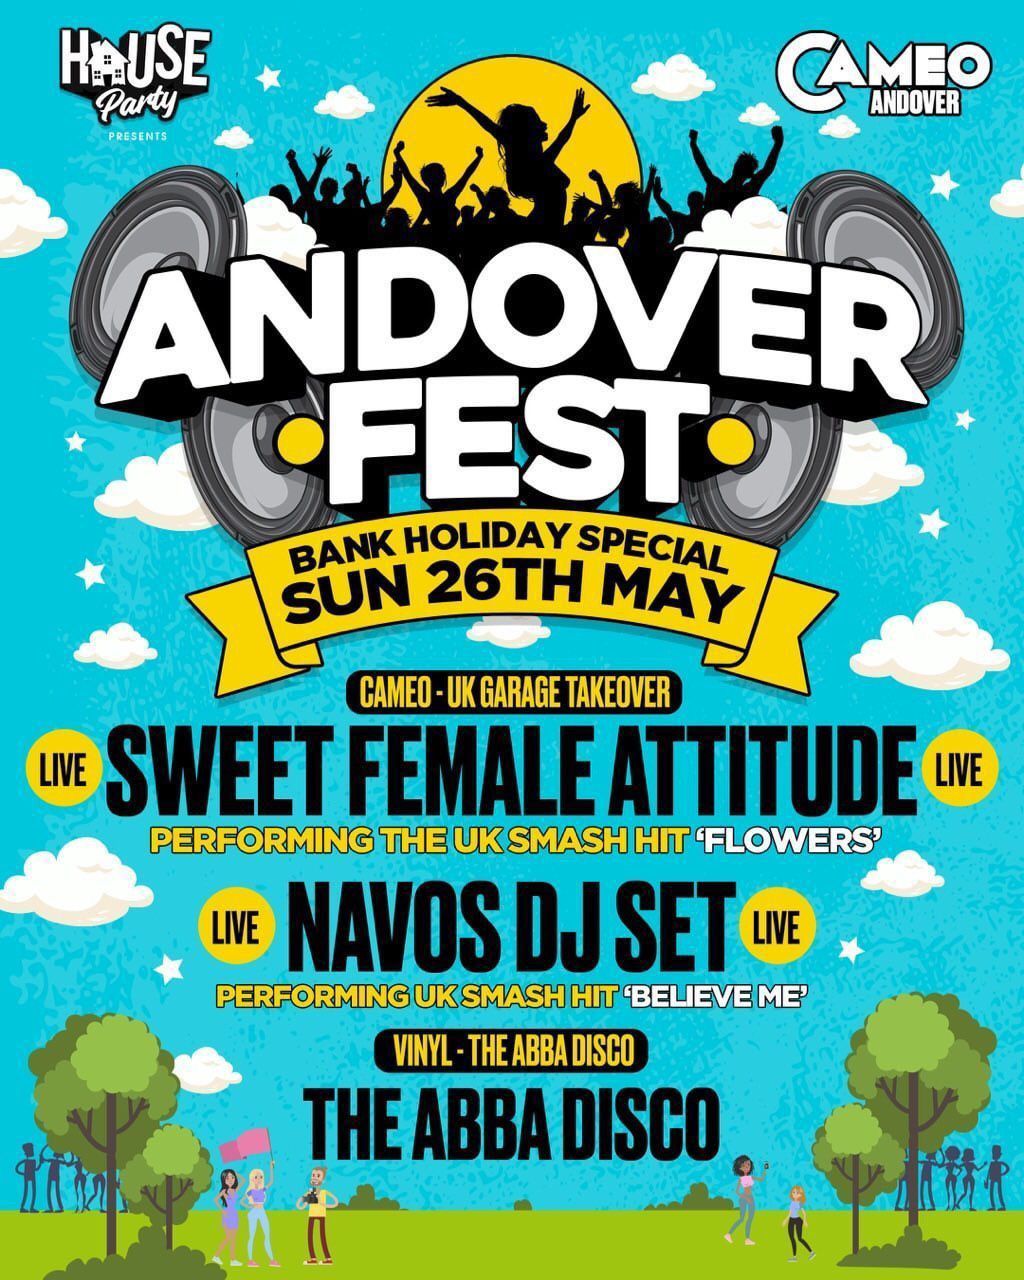 ANDOVER FEST - Bank Holiday Sunday 26th May - CAMEO ANDOVER